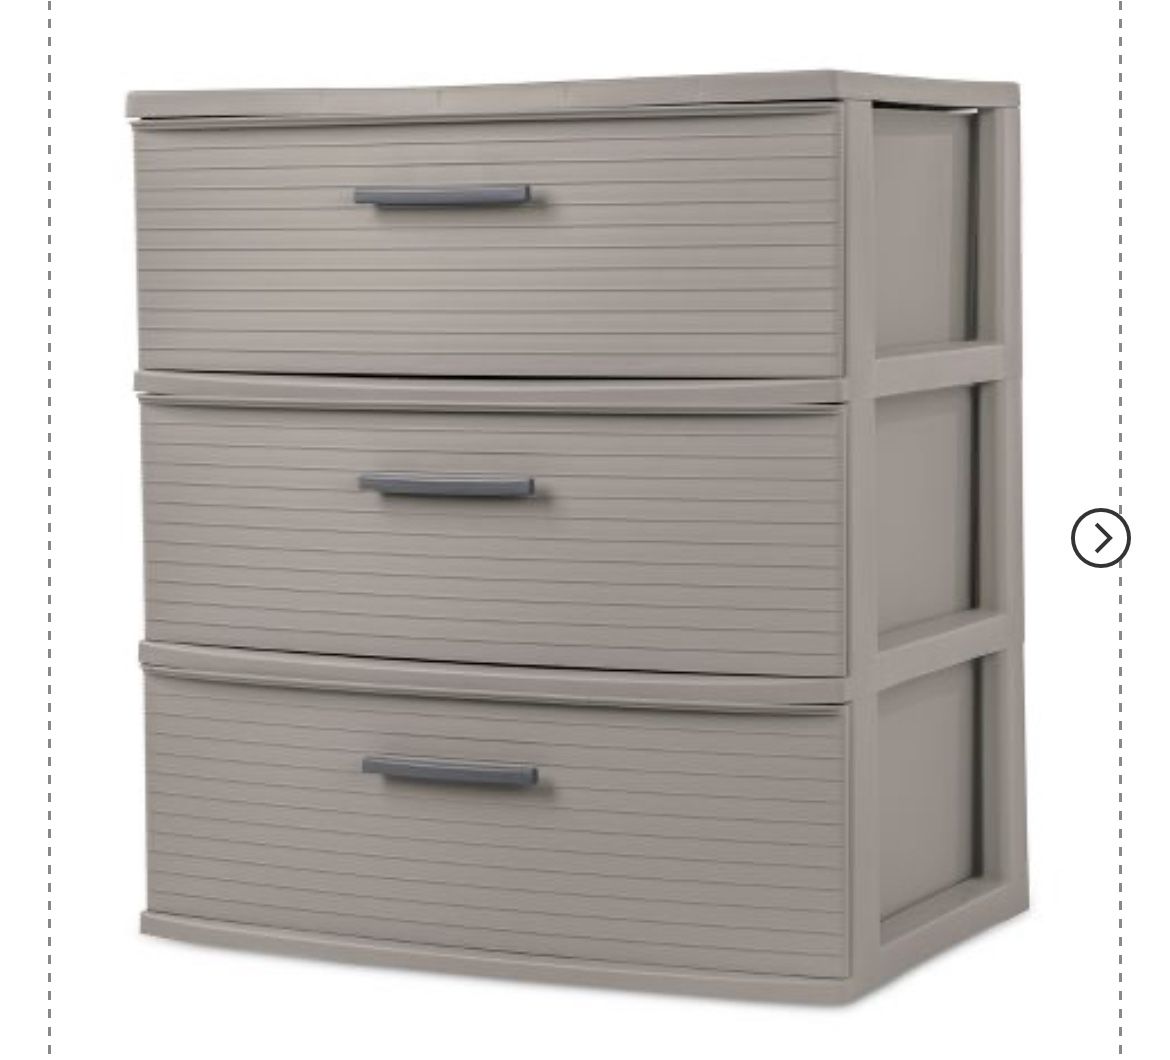 3 Drawer Wide Tower Light Gray - Brightroom™